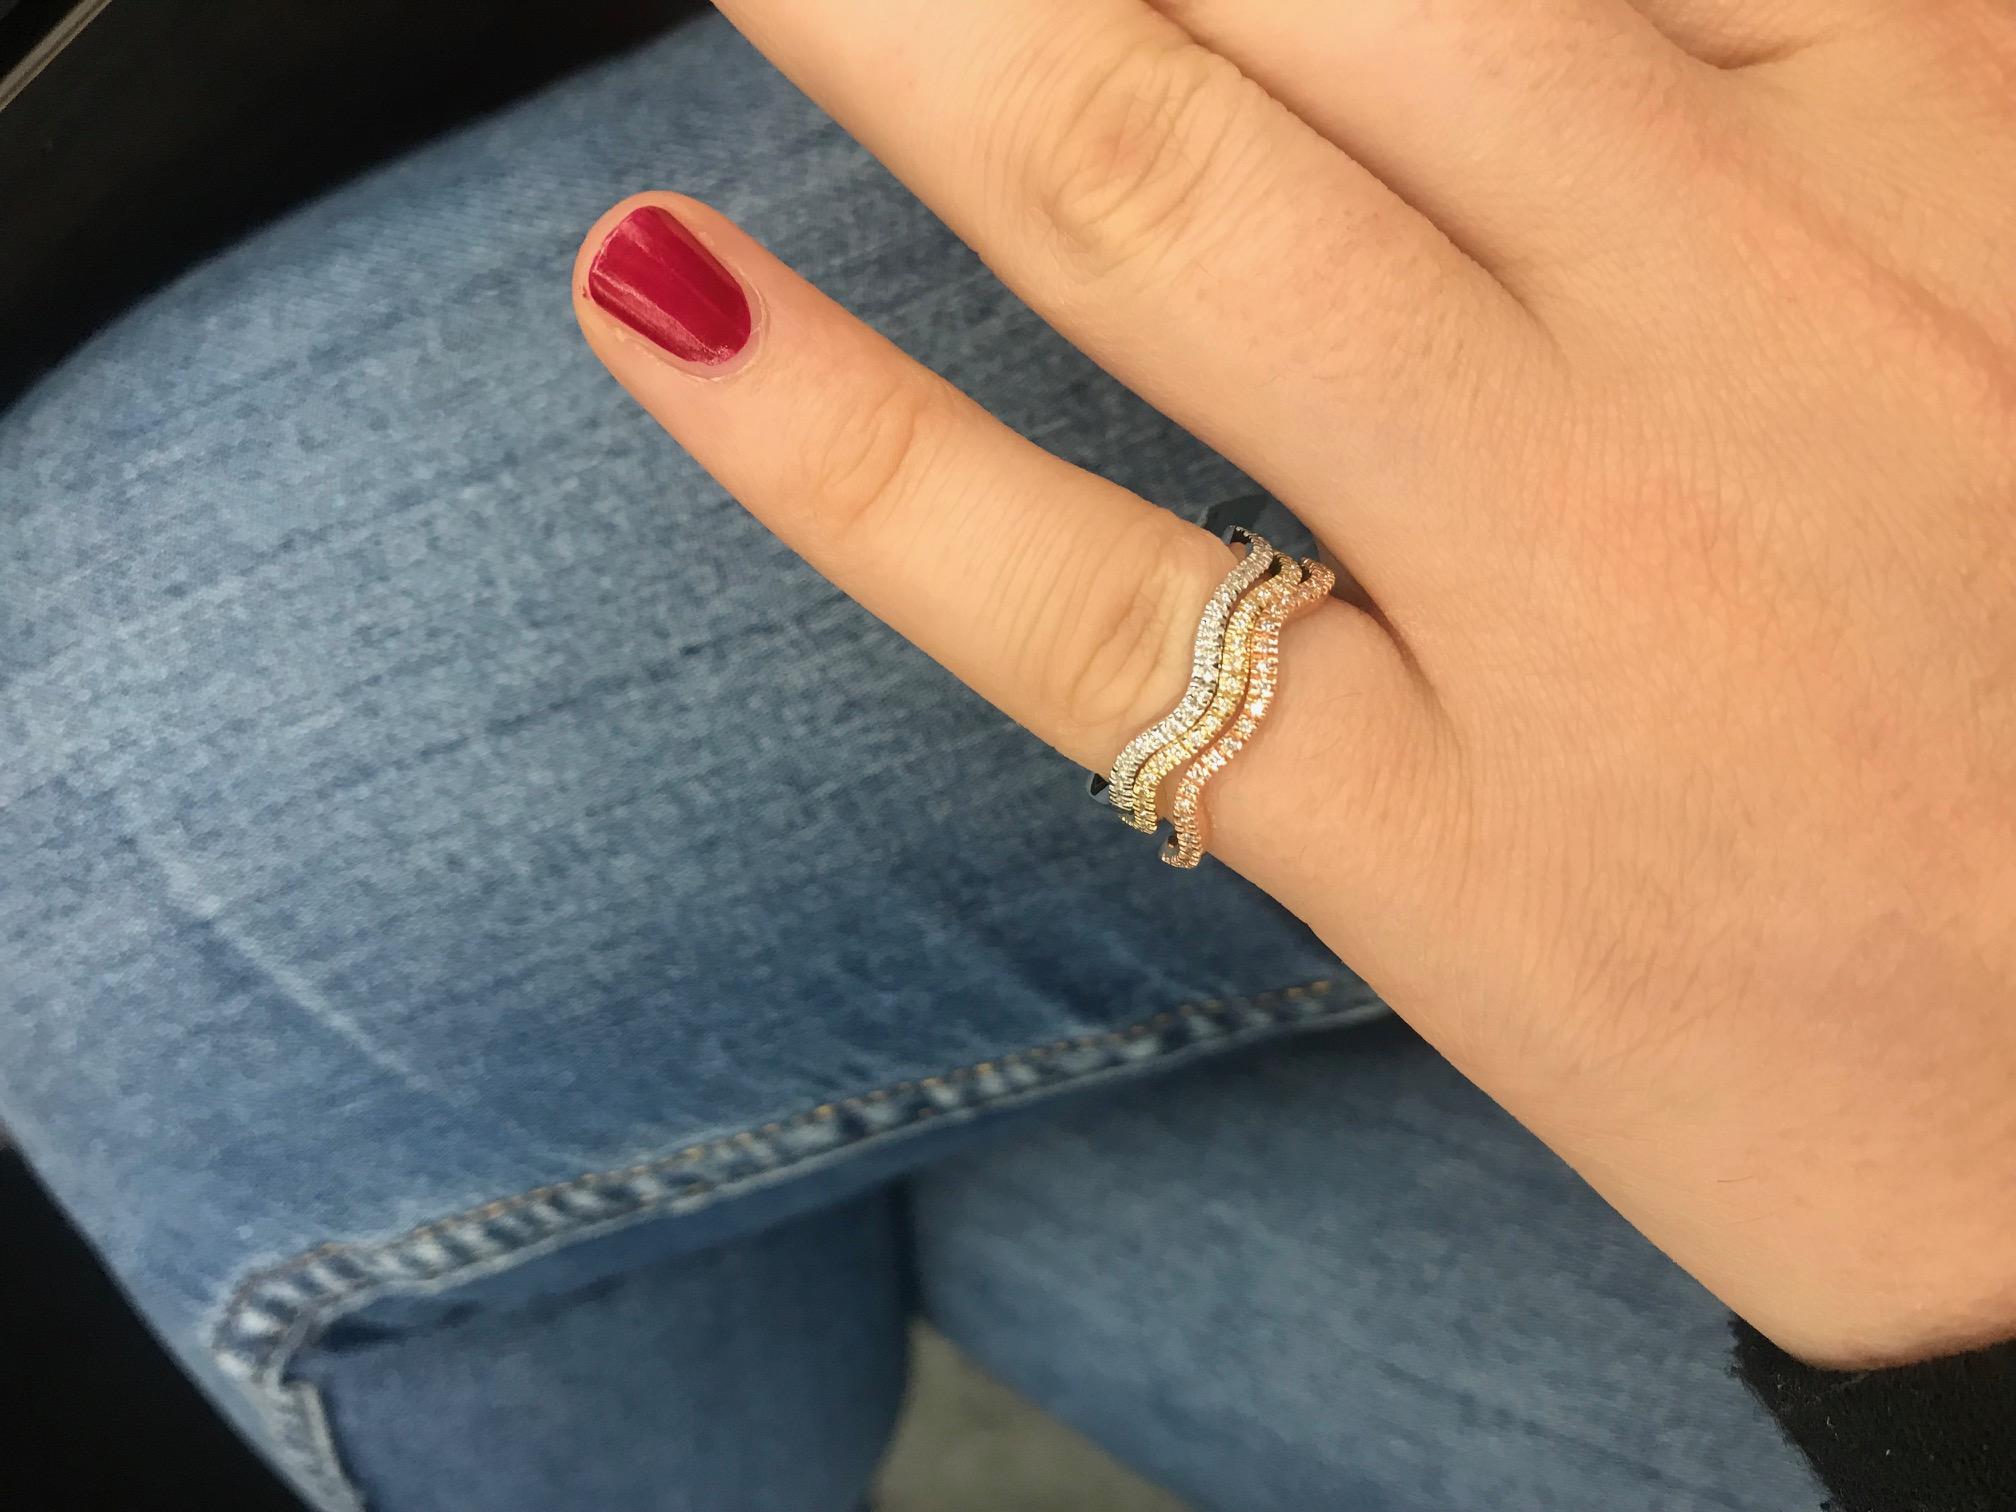 14K Rose gold wave ring featuring round brilliants weighing 0.07 carats. Available in white and yellow gold. 
Great for stacking!
Available in all sizes.